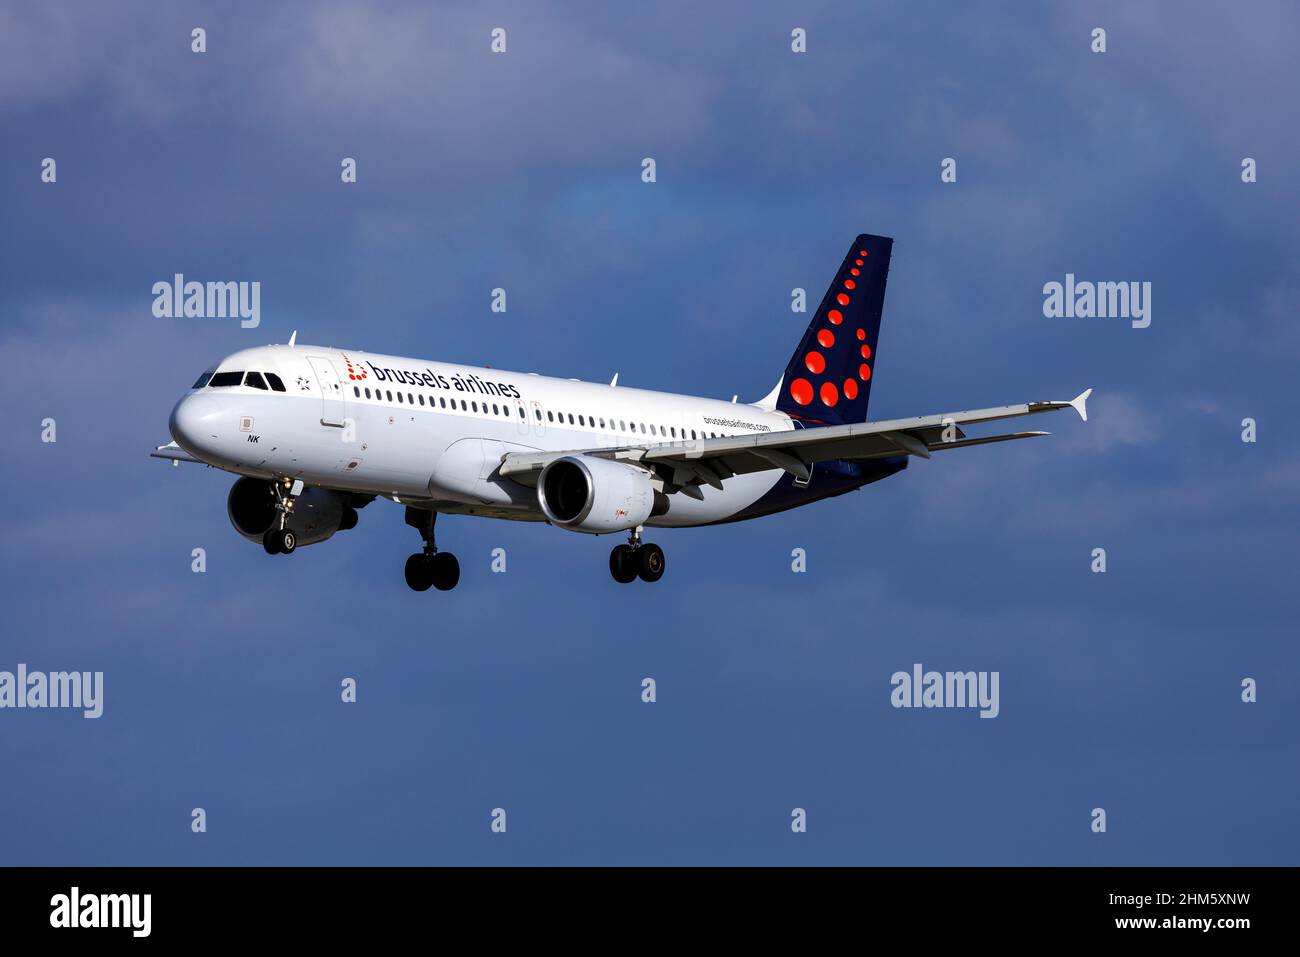 Brussels Airlines Airbus A320-214 (REG: OO-SNK) arriving in Malta for servicing. Stock Photo